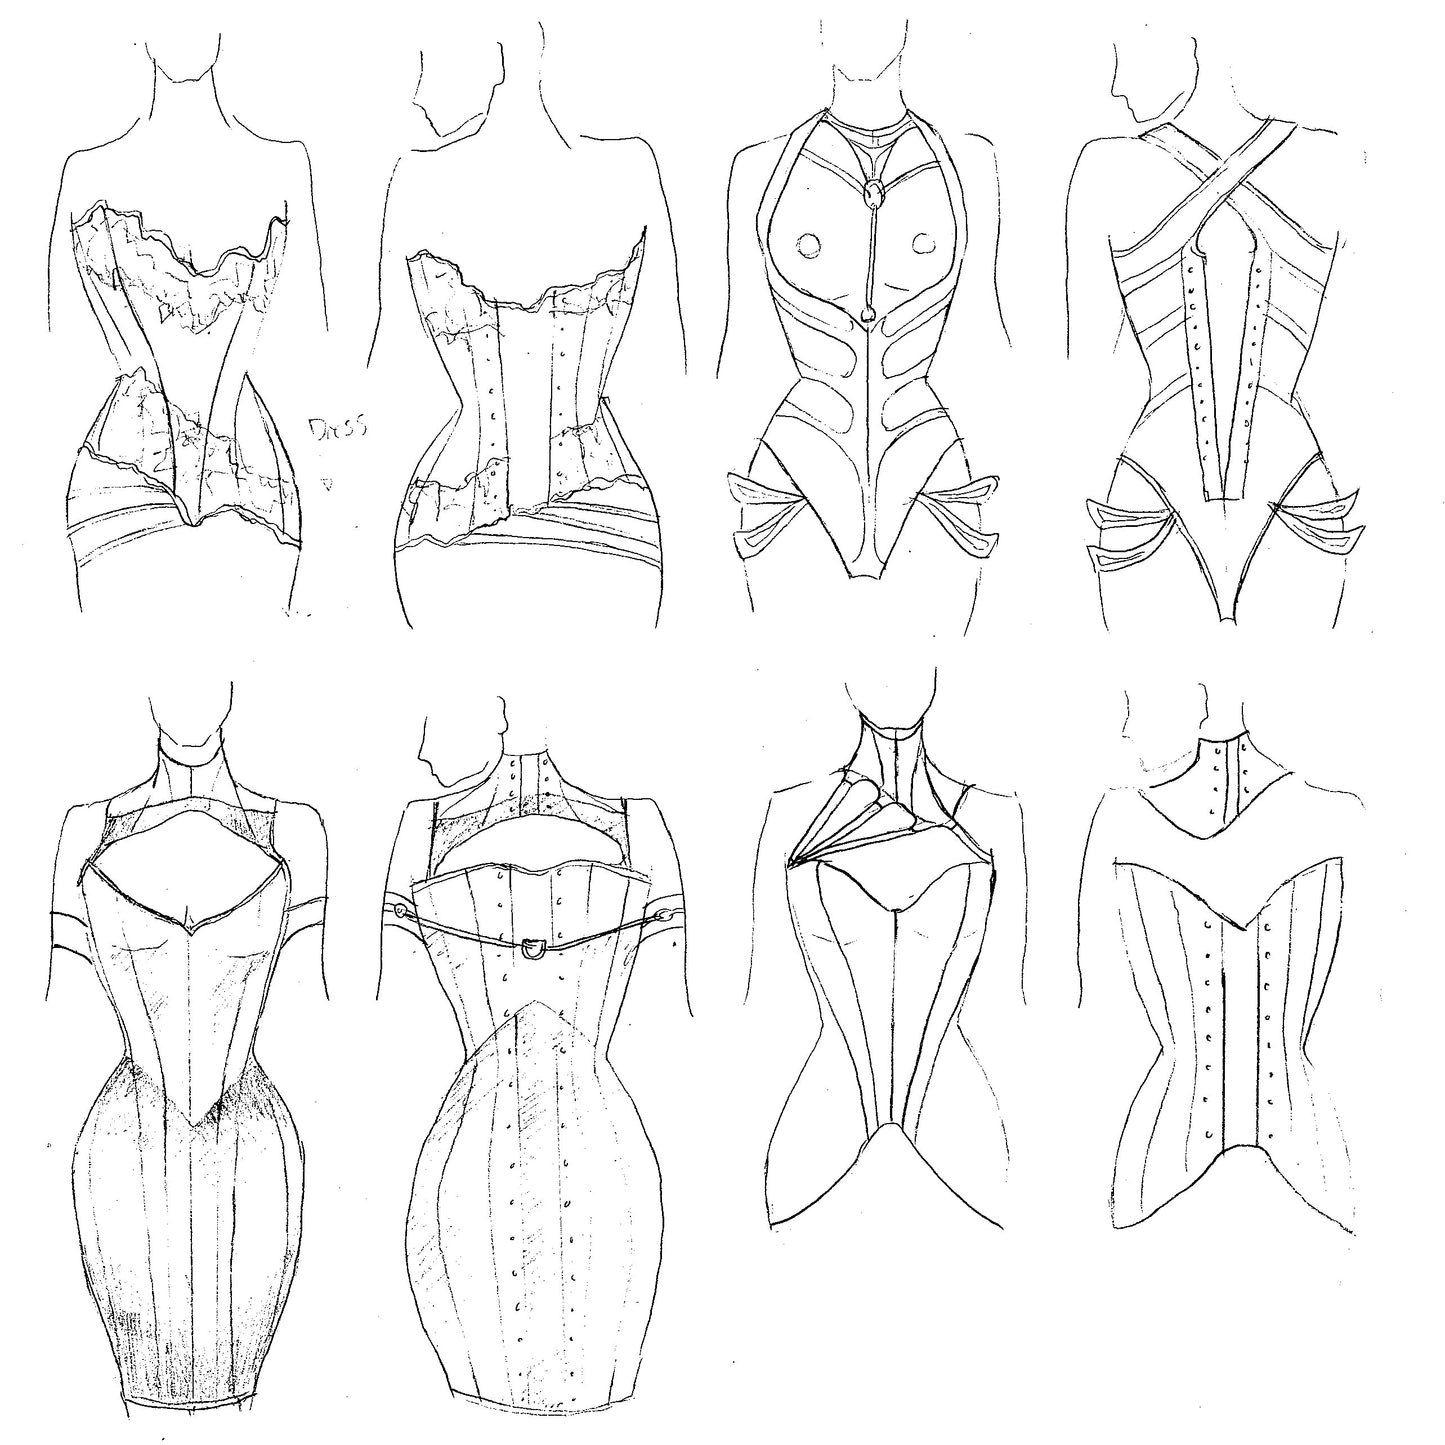 A series of sketches of corset designs